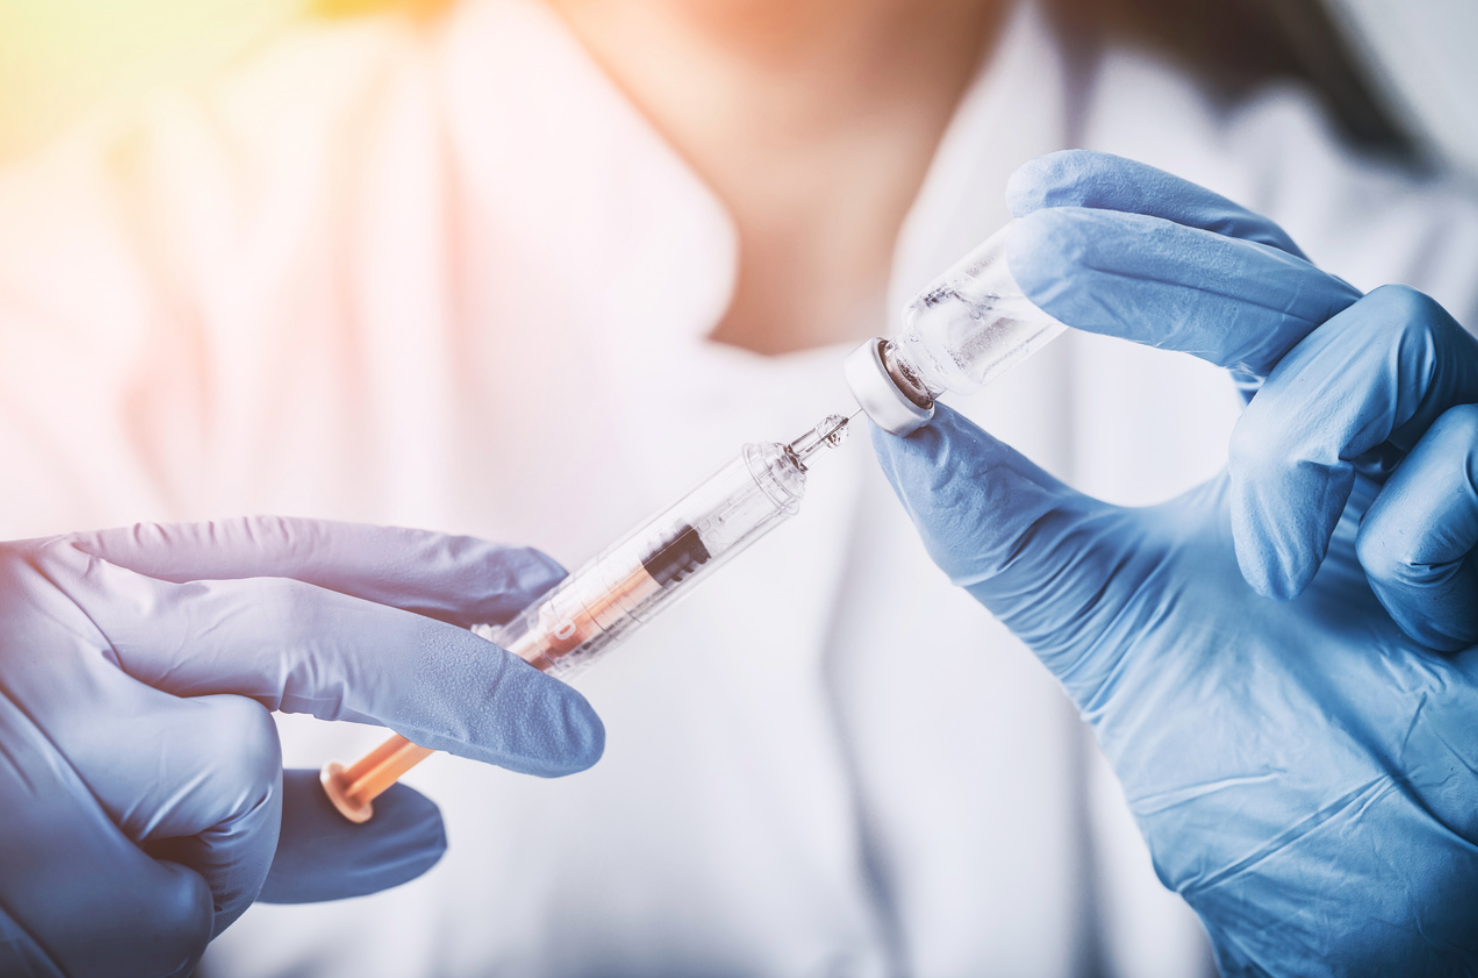 Study Finds Significant Drop in Vaccine Confidence During COVID-19 Pandemic